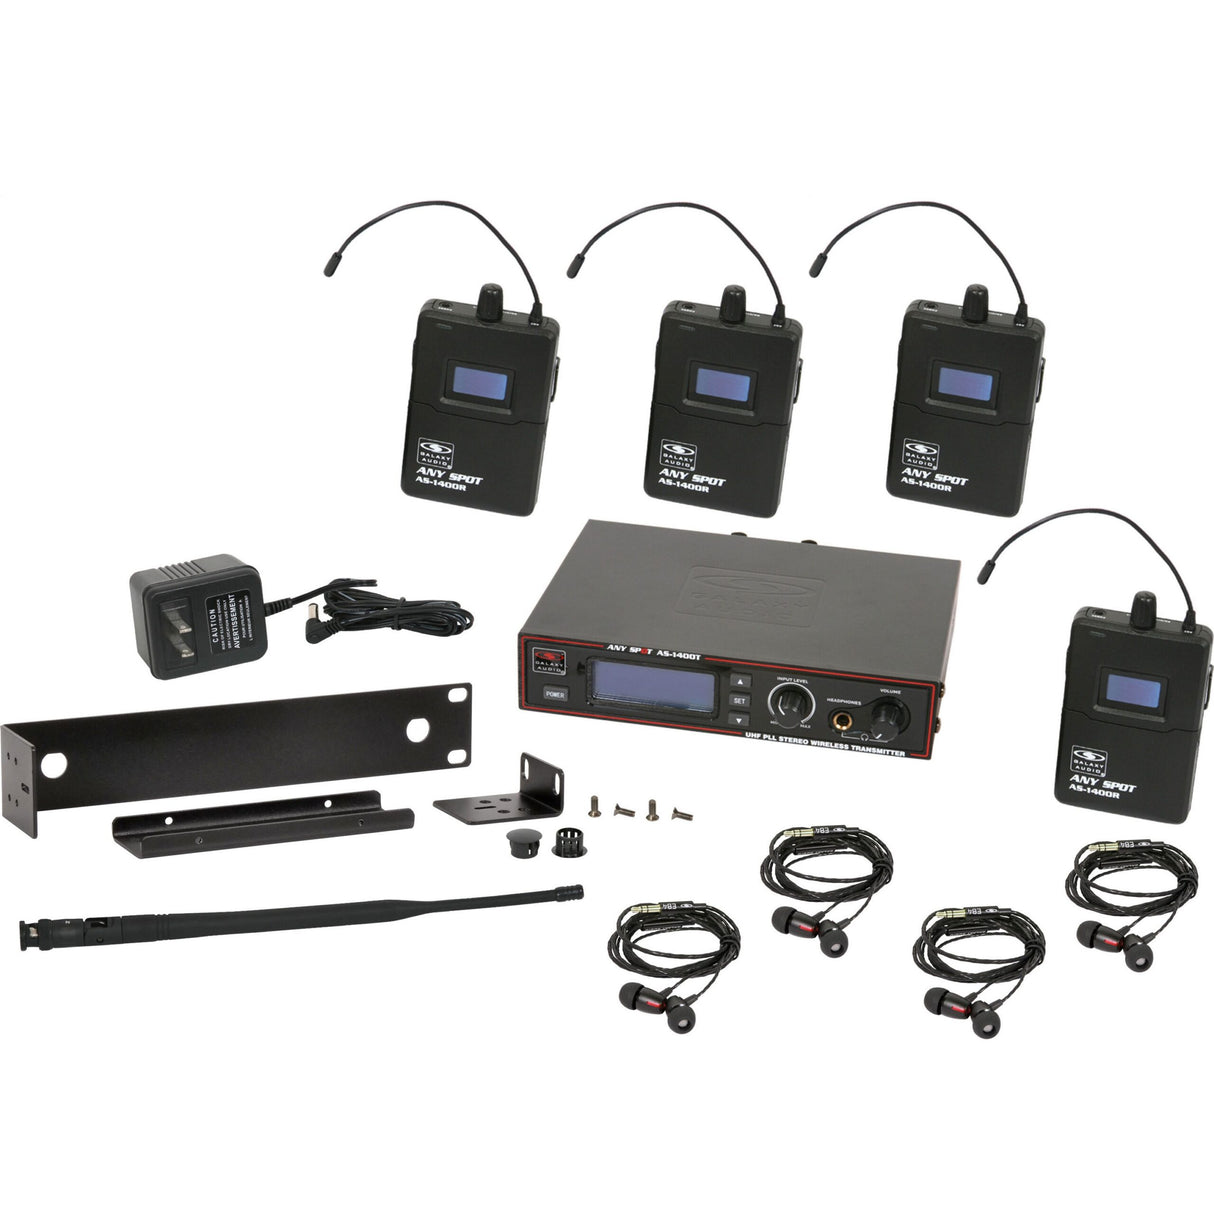 Galaxy Audio AS-1400-4M In-Ear Wireless 4 User Pack System, M Band 516-558 MHz